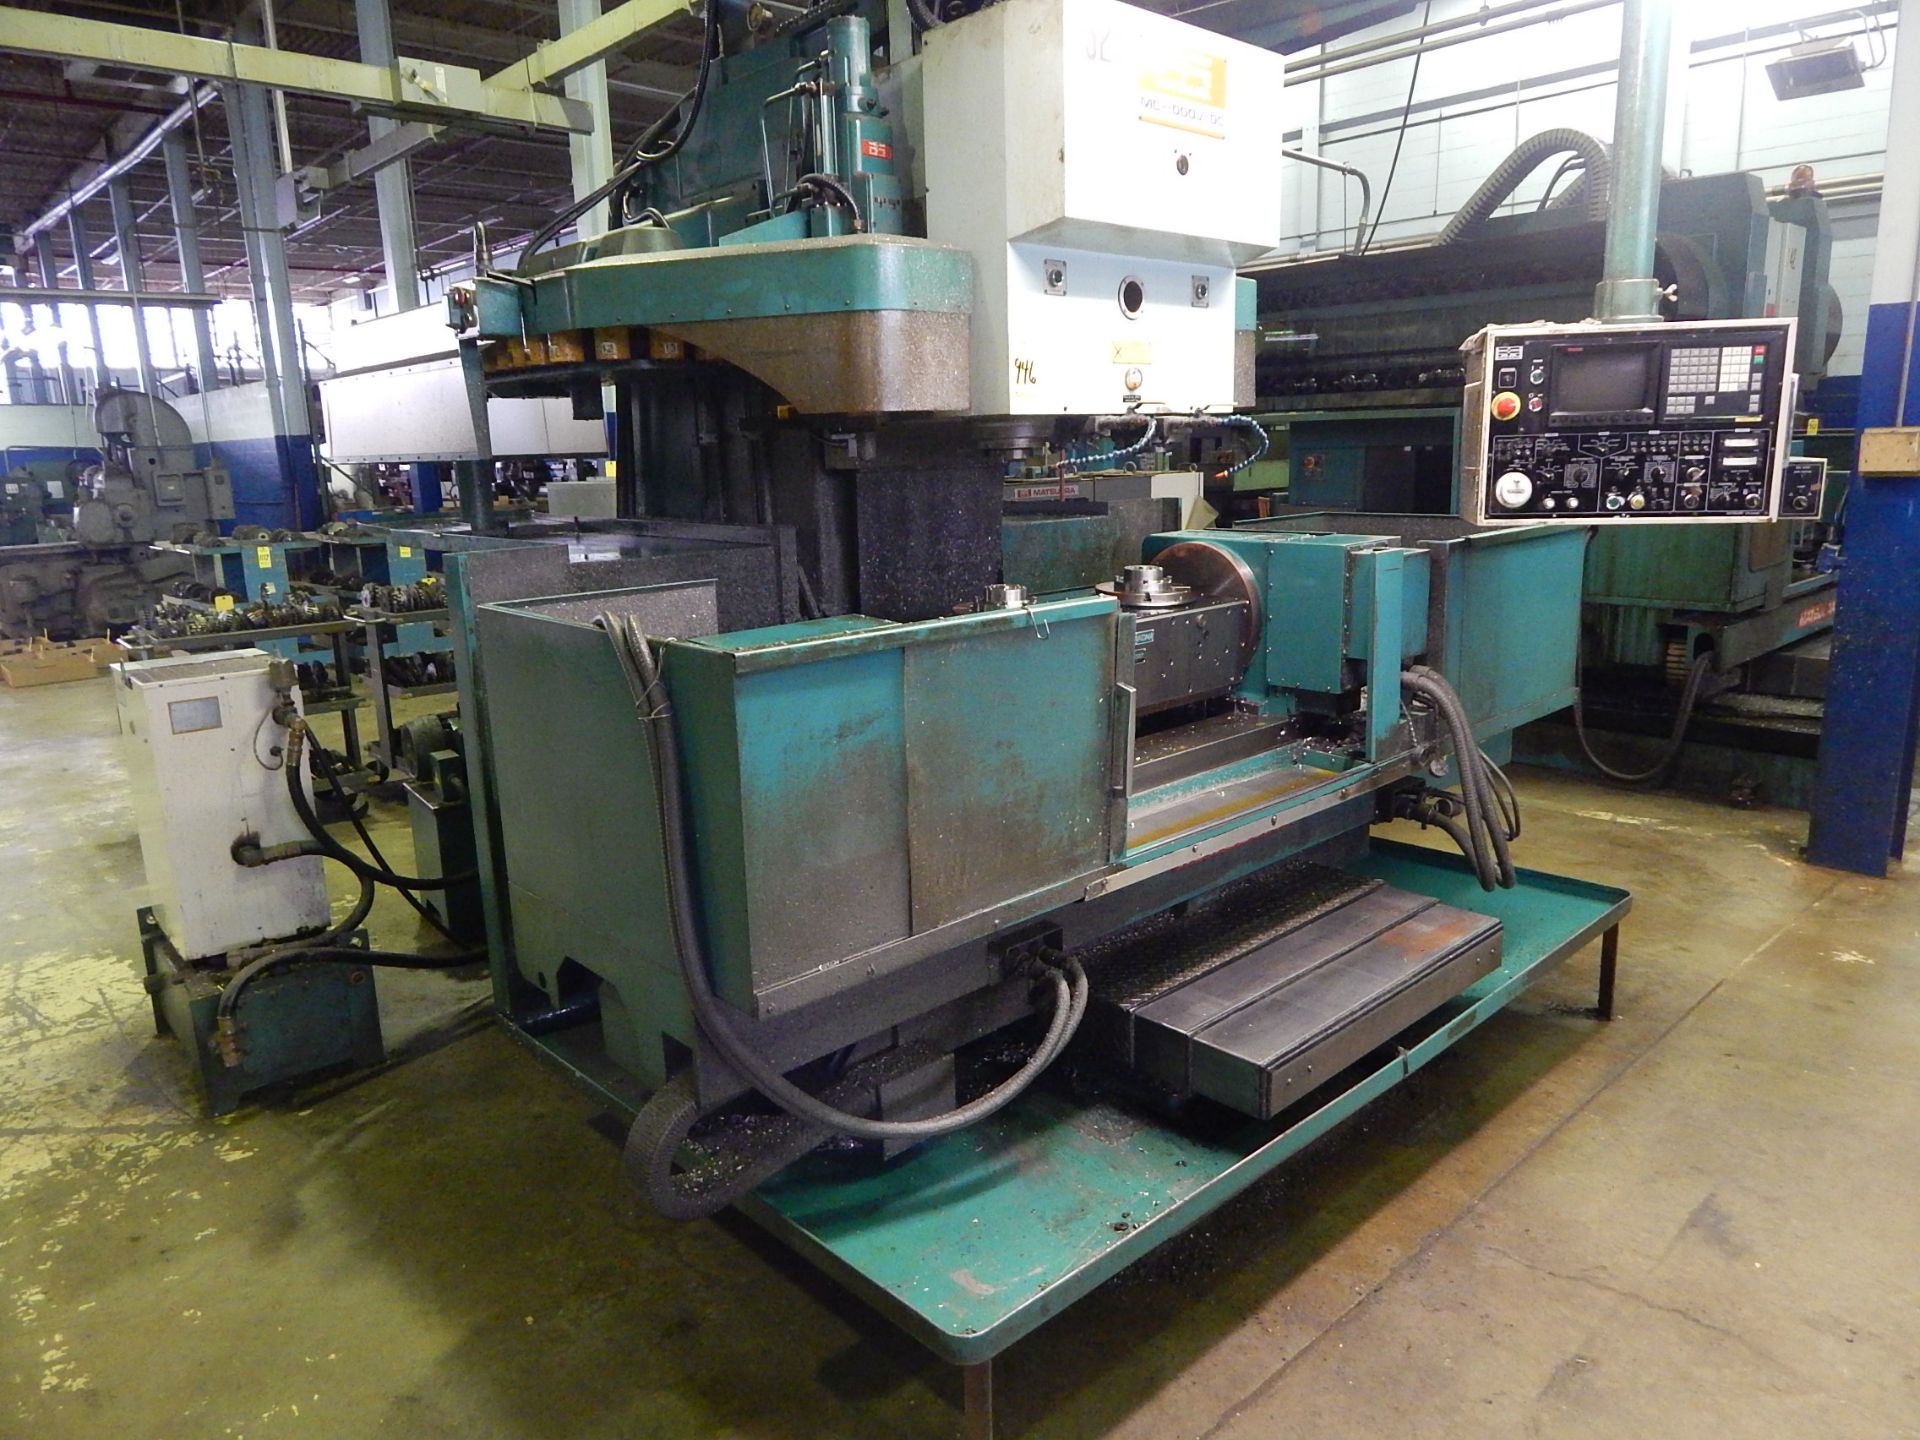 Matsuura Model MC-1000V-DC Twin Spindle CNC Vertical Machining Center, s/n 890307598, New 1989, - Image 3 of 15